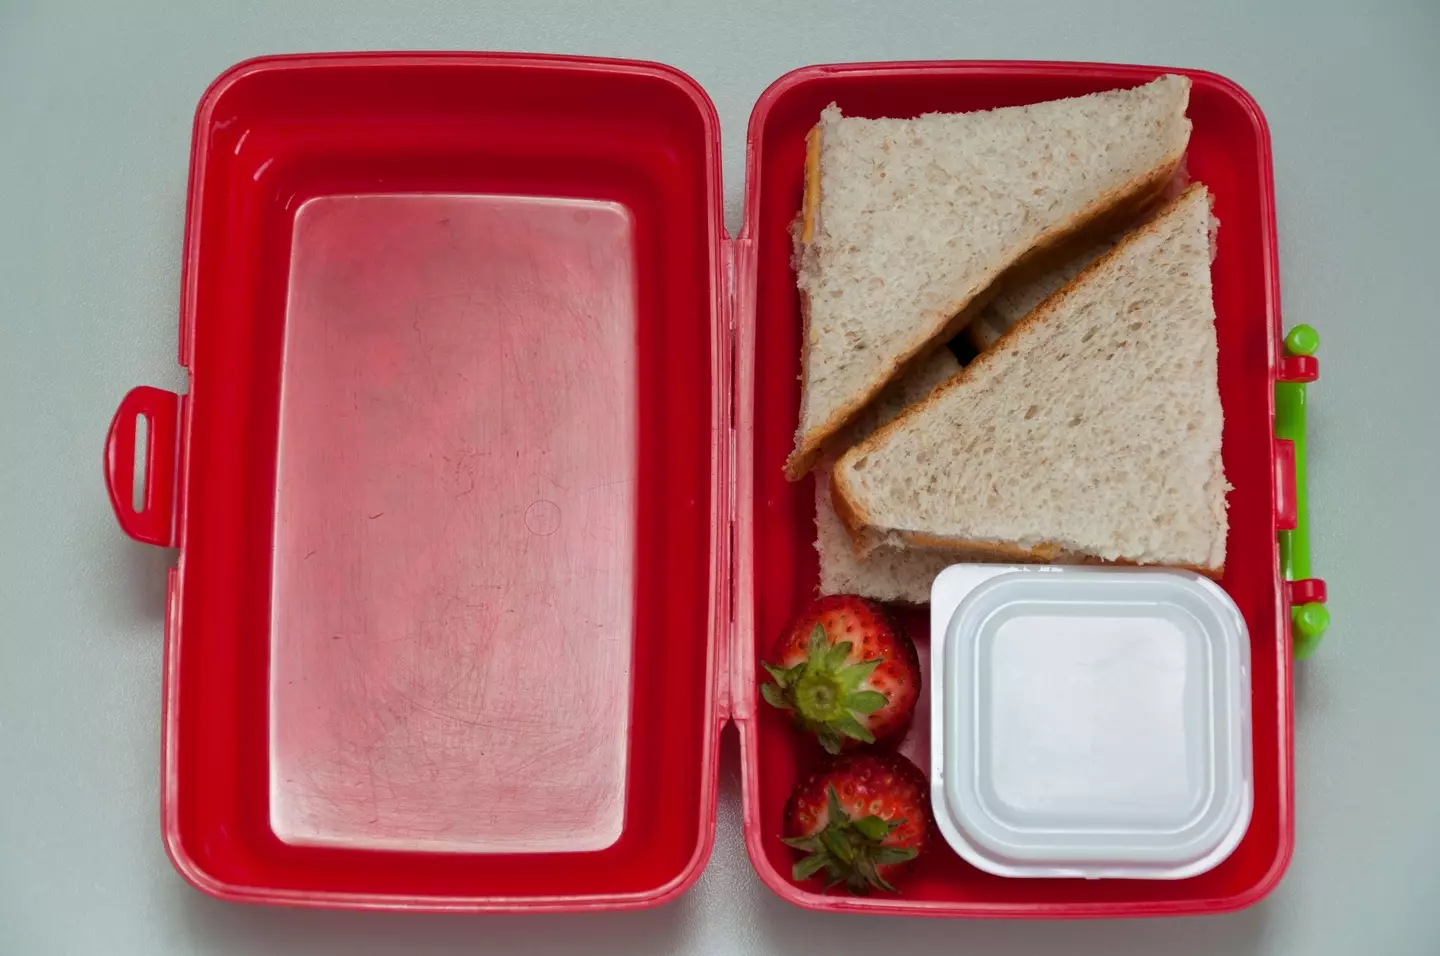 One mum has been praised for her 'simple' lunchbox (